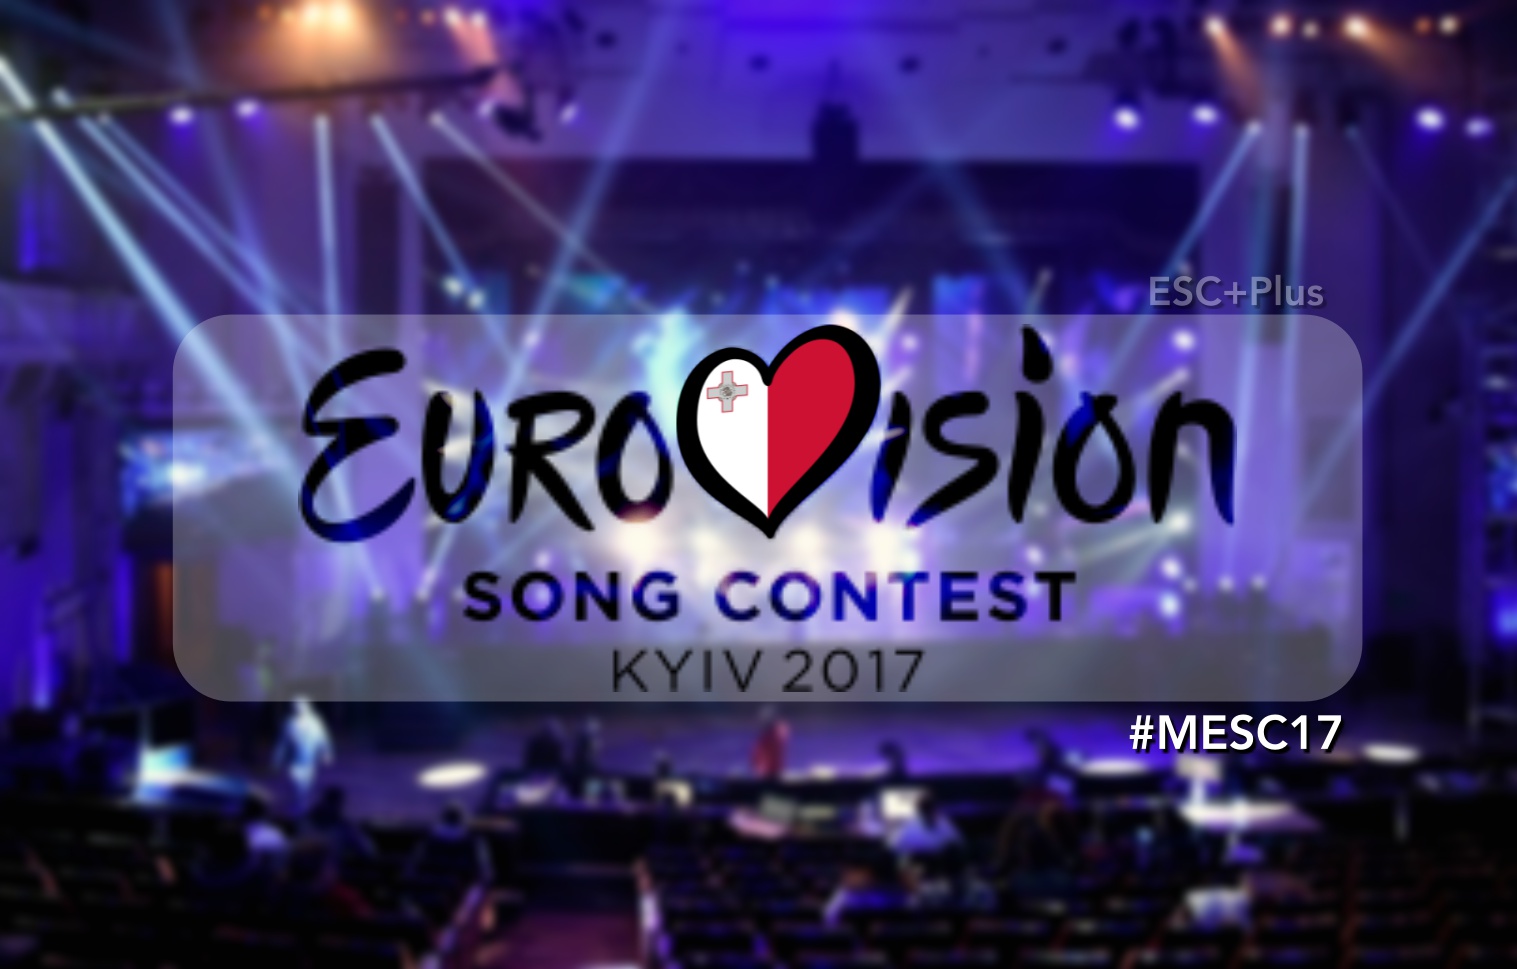 Malta: PBS announces 16 finalists for MESC 2017, listen to the songs!